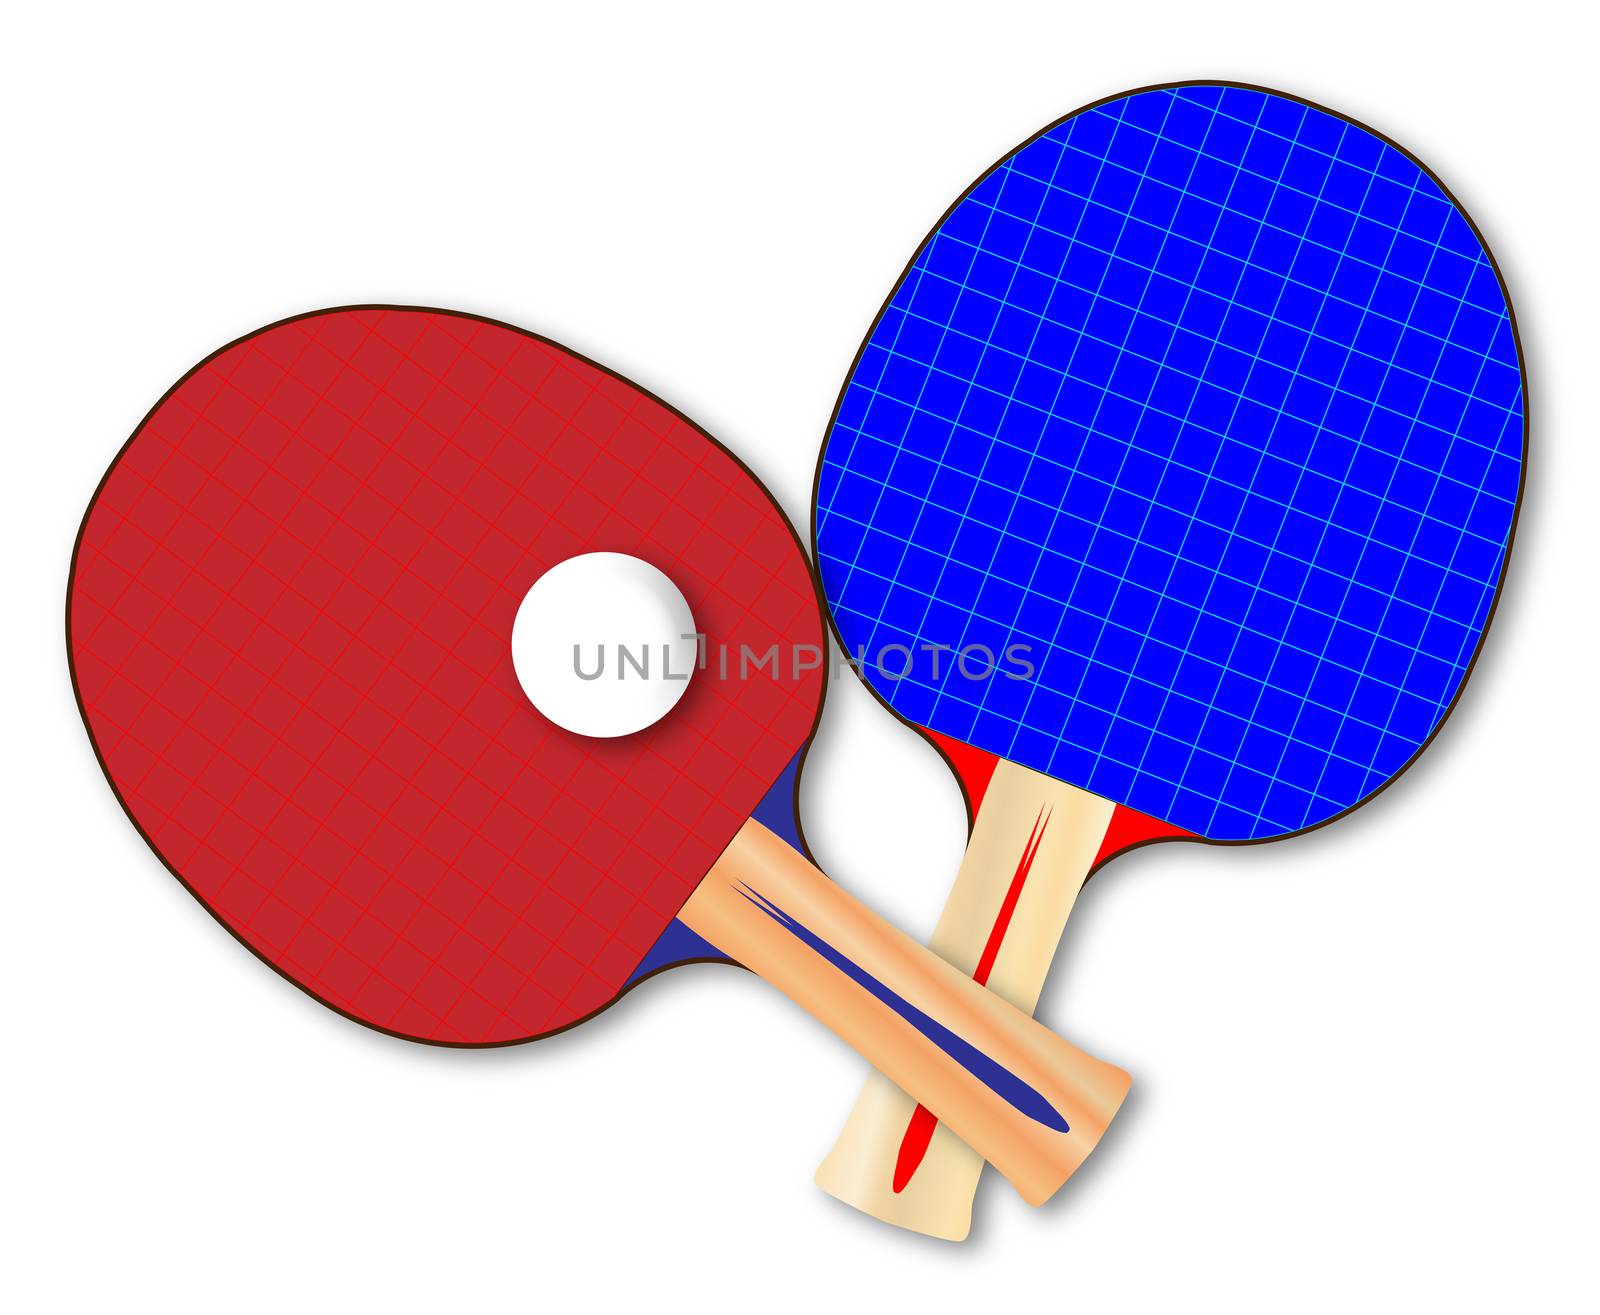 Two table tennis bats or rackets and ball over a white background